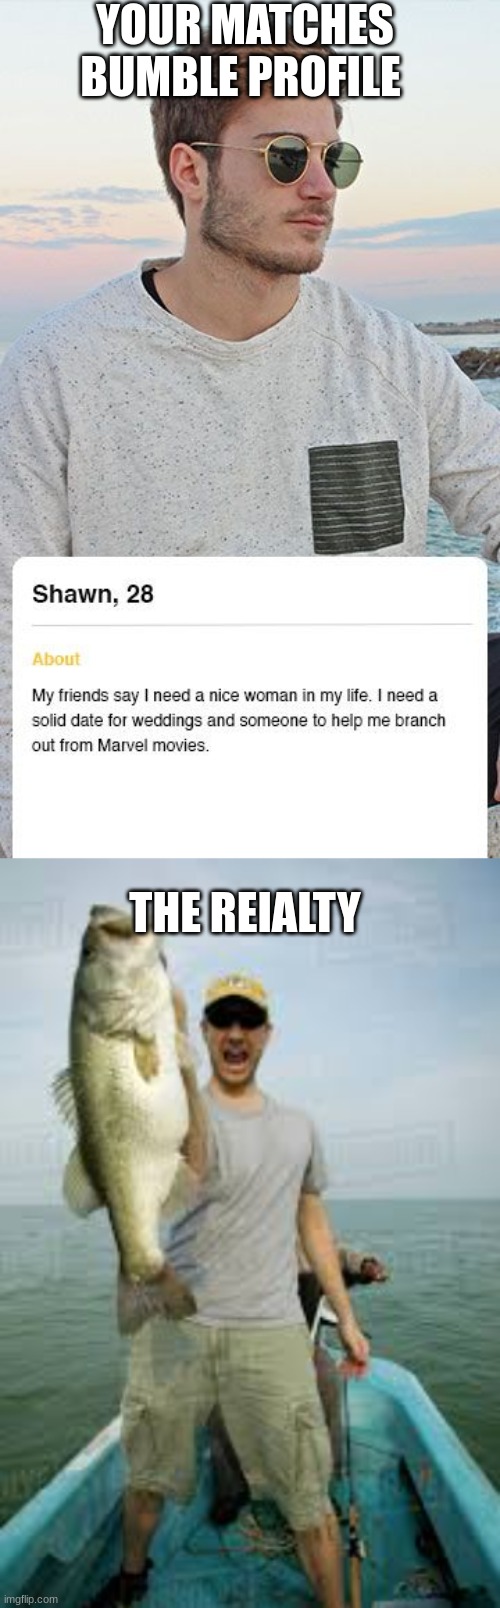 YOUR MATCHES BUMBLE PROFILE; THE REALITY | image tagged in grant caught a fish | made w/ Imgflip meme maker